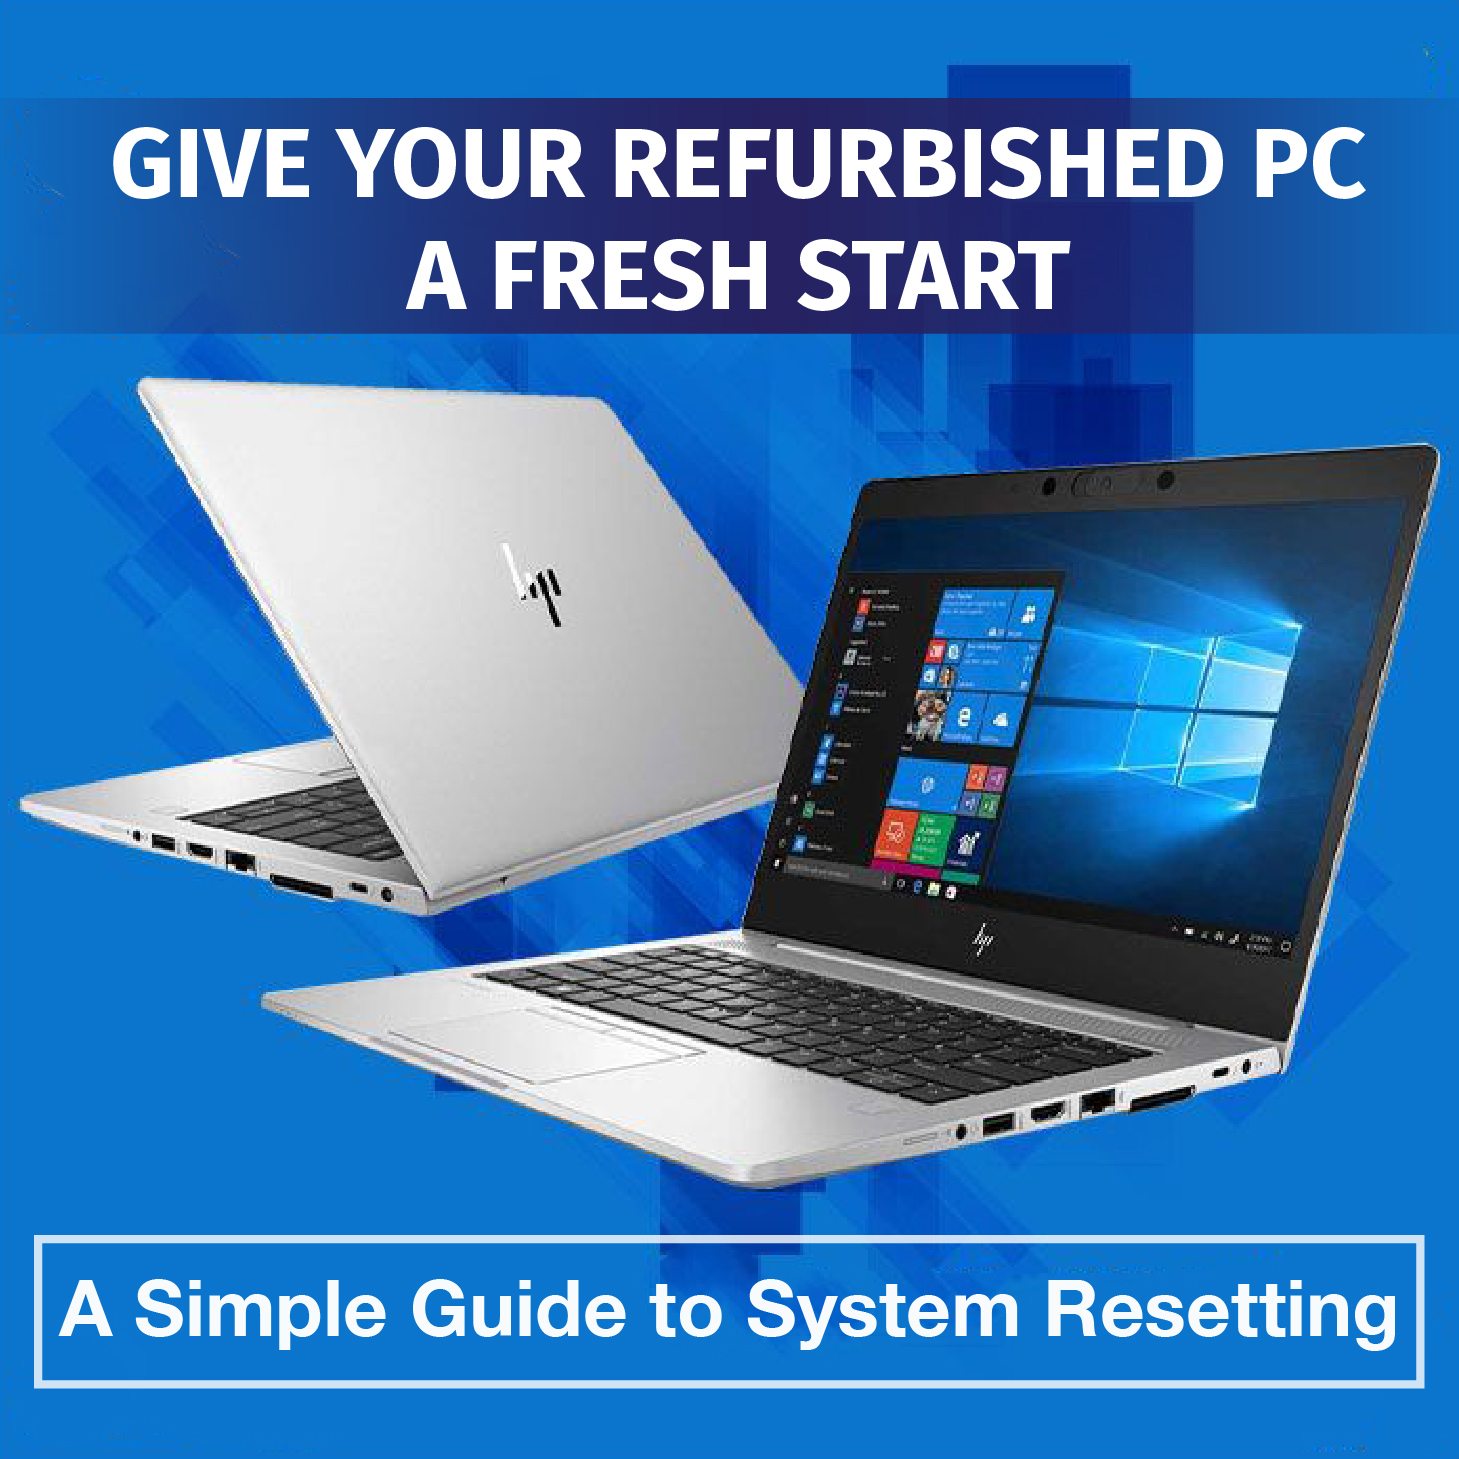 Refresh Refurbished PC: A Complete Guide to System Resetting